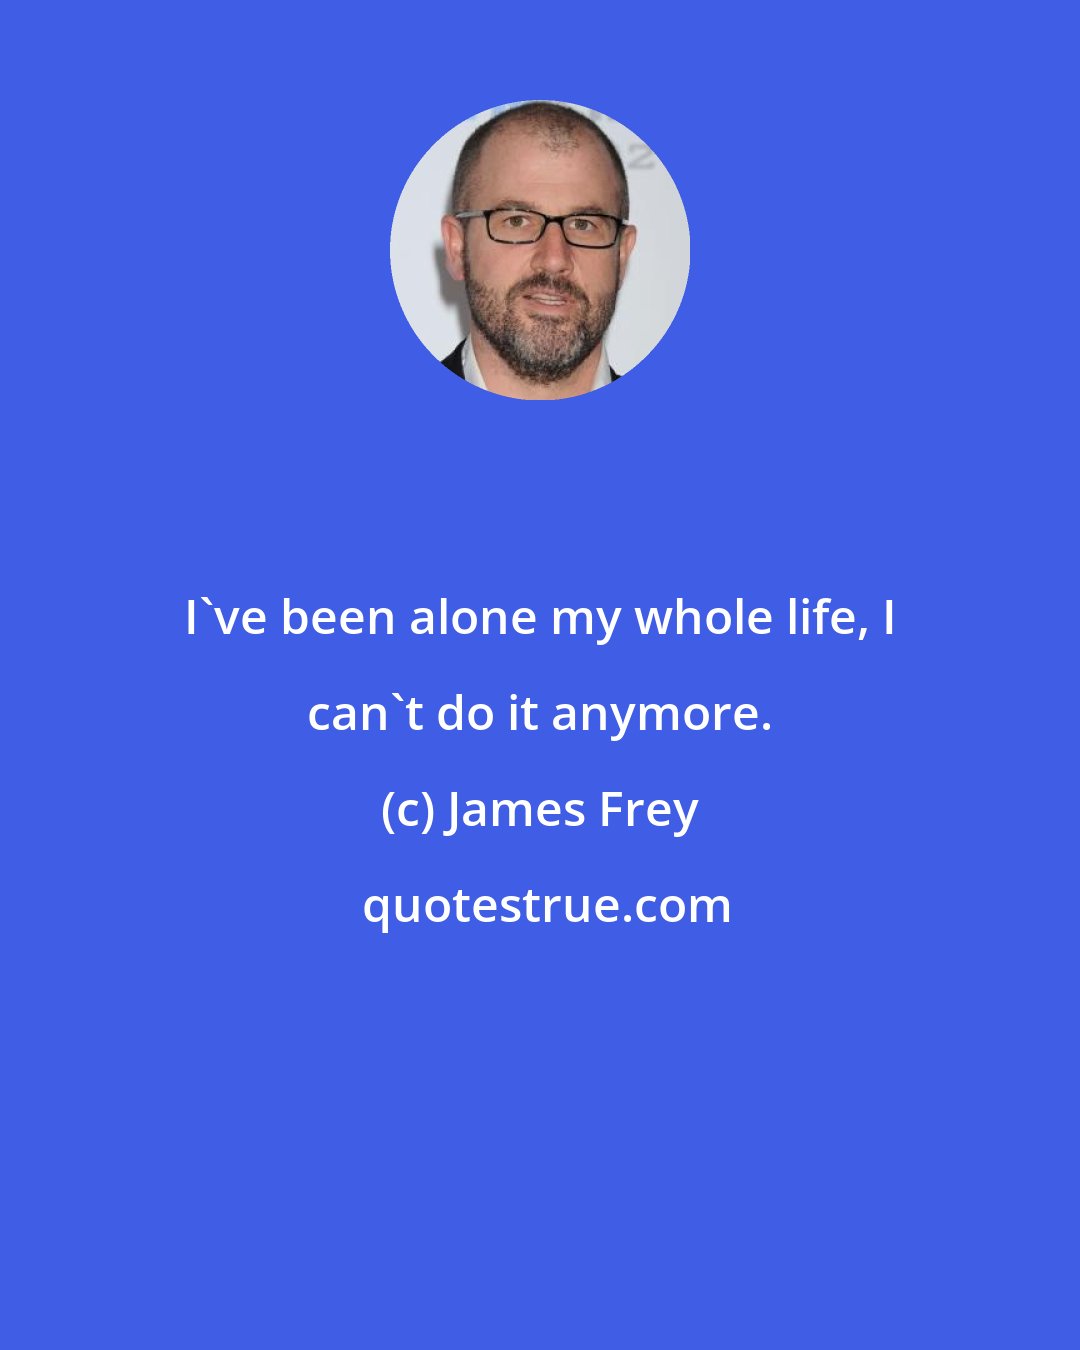 James Frey: I've been alone my whole life, I can't do it anymore.